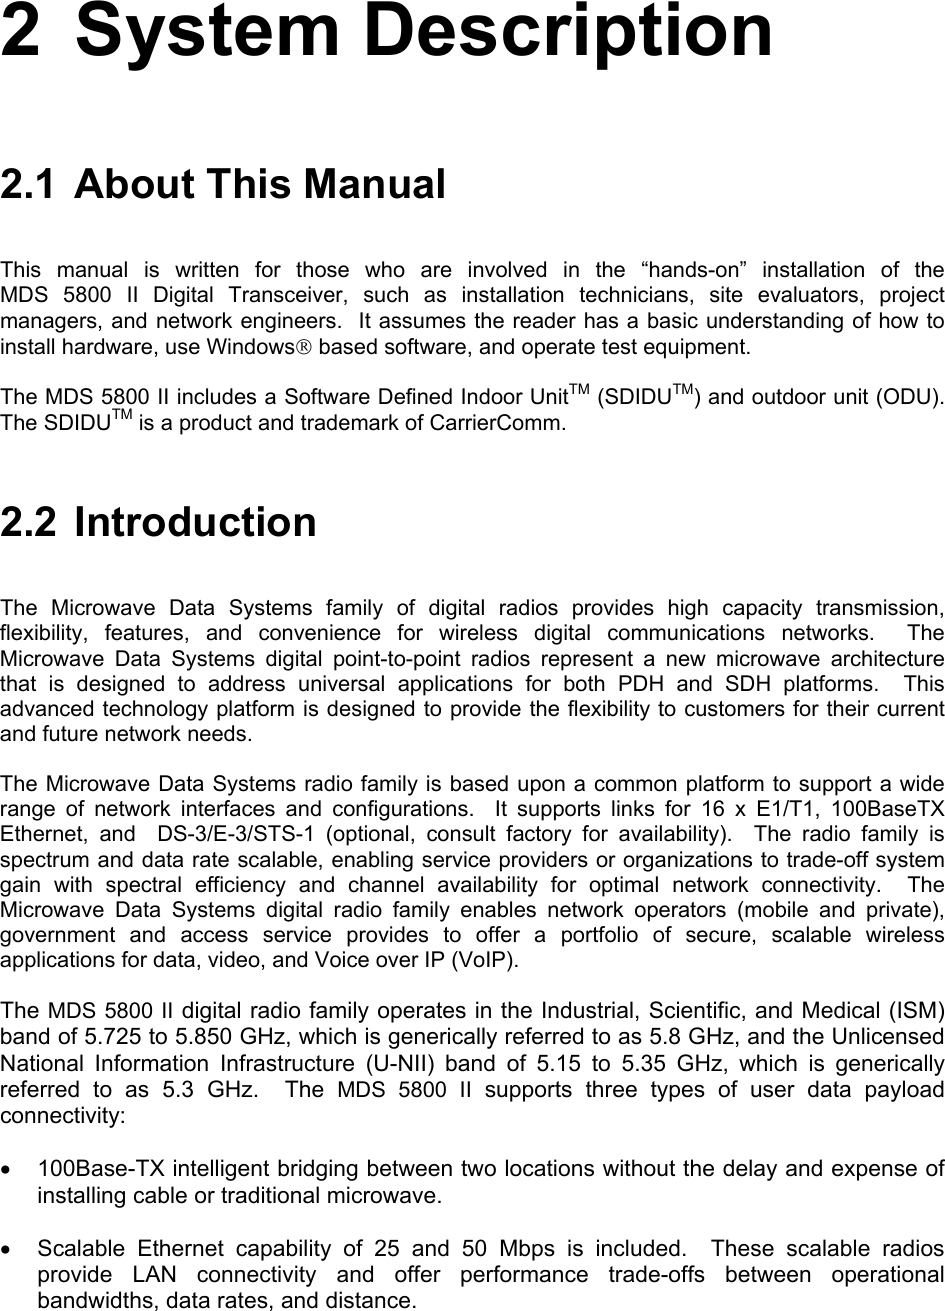 2 System Description 2.1  About This Manual This manual is written for those who are involved in the “hands-on” installation of the  MDS 5800 II Digital Transceiver, such as installation technicians, site evaluators, project managers, and network engineers.  It assumes the reader has a basic understanding of how to install hardware, use Windows based software, and operate test equipment. The MDS 5800 II includes a Software Defined Indoor UnitTM (SDIDUTM) and outdoor unit (ODU).  The SDIDUTM is a product and trademark of CarrierComm. 2.2 Introduction The Microwave Data Systems family of digital radios provides high capacity transmission, flexibility, features, and convenience for wireless digital communications networks.  The Microwave Data Systems digital point-to-point radios represent a new microwave architecture that is designed to address universal applications for both PDH and SDH platforms.  This advanced technology platform is designed to provide the flexibility to customers for their current and future network needs. The Microwave Data Systems radio family is based upon a common platform to support a wide range of network interfaces and configurations.  It supports links for 16 x E1/T1, 100BaseTX Ethernet, and  DS-3/E-3/STS-1 (optional, consult factory for availability).  The radio family is spectrum and data rate scalable, enabling service providers or organizations to trade-off system gain with spectral efficiency and channel availability for optimal network connectivity.  The Microwave Data Systems digital radio family enables network operators (mobile and private), government and access service provides to offer a portfolio of secure, scalable wireless applications for data, video, and Voice over IP (VoIP).  The MDS 5800 II digital radio family operates in the Industrial, Scientific, and Medical (ISM) band of 5.725 to 5.850 GHz, which is generically referred to as 5.8 GHz, and the Unlicensed National Information Infrastructure (U-NII) band of 5.15 to 5.35 GHz, which is generically referred to as 5.3 GHz.  The MDS 5800 II supports three types of user data payload connectivity: •  100Base-TX intelligent bridging between two locations without the delay and expense of installing cable or traditional microwave. •  Scalable Ethernet capability of 25 and 50 Mbps is included.  These scalable radios provide LAN connectivity and offer performance trade-offs between operational bandwidths, data rates, and distance.  